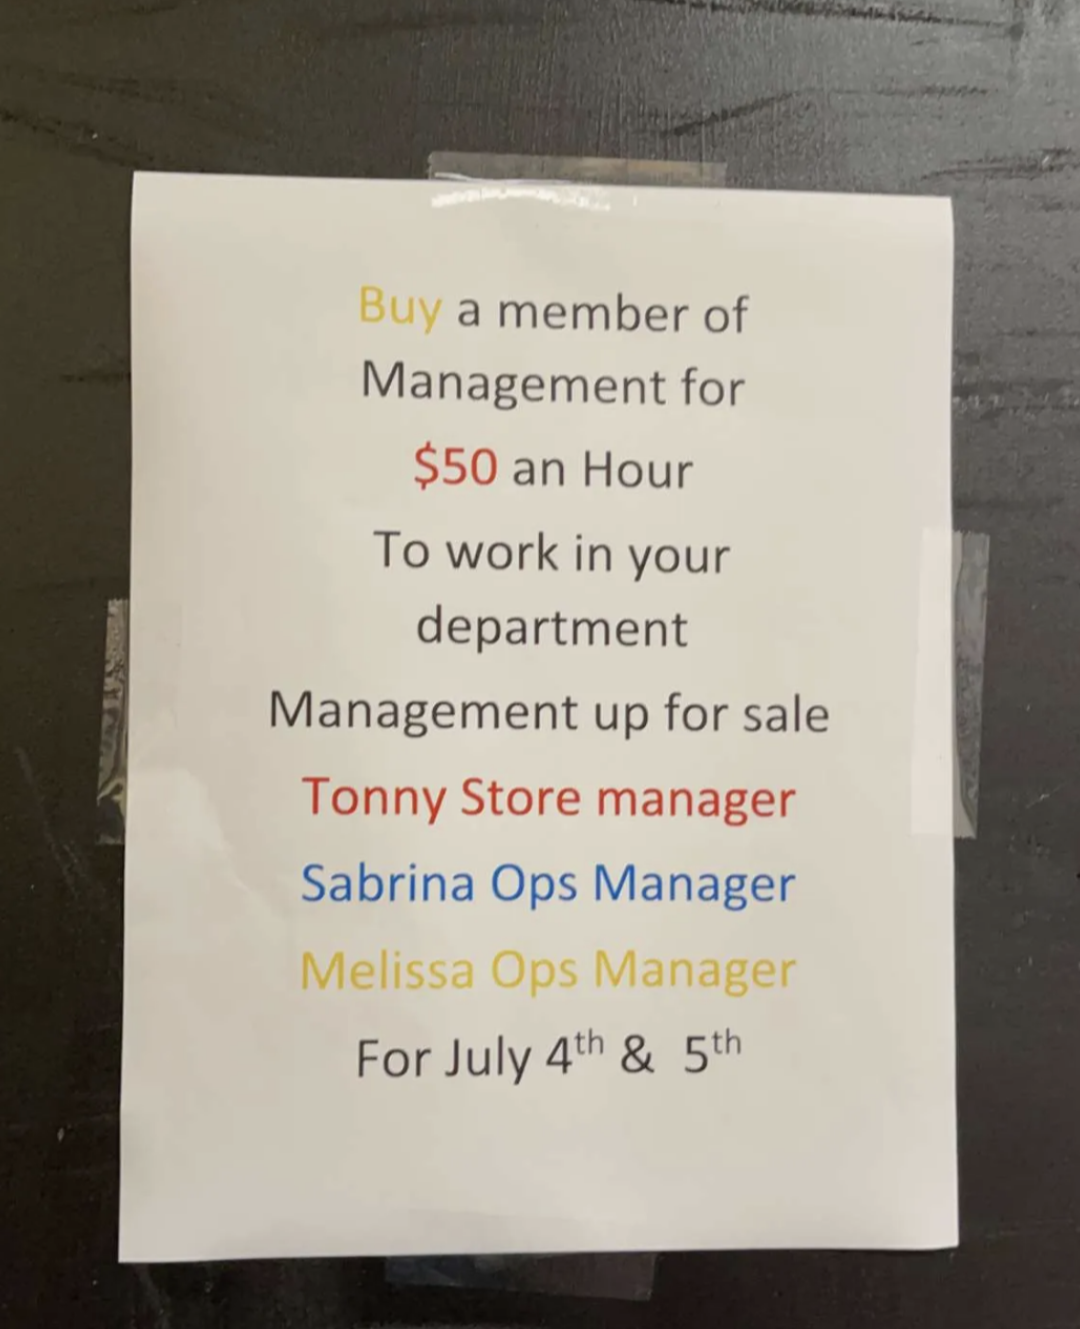 A note from management asking employees to pay $50 an hour to have someone cover their shift.